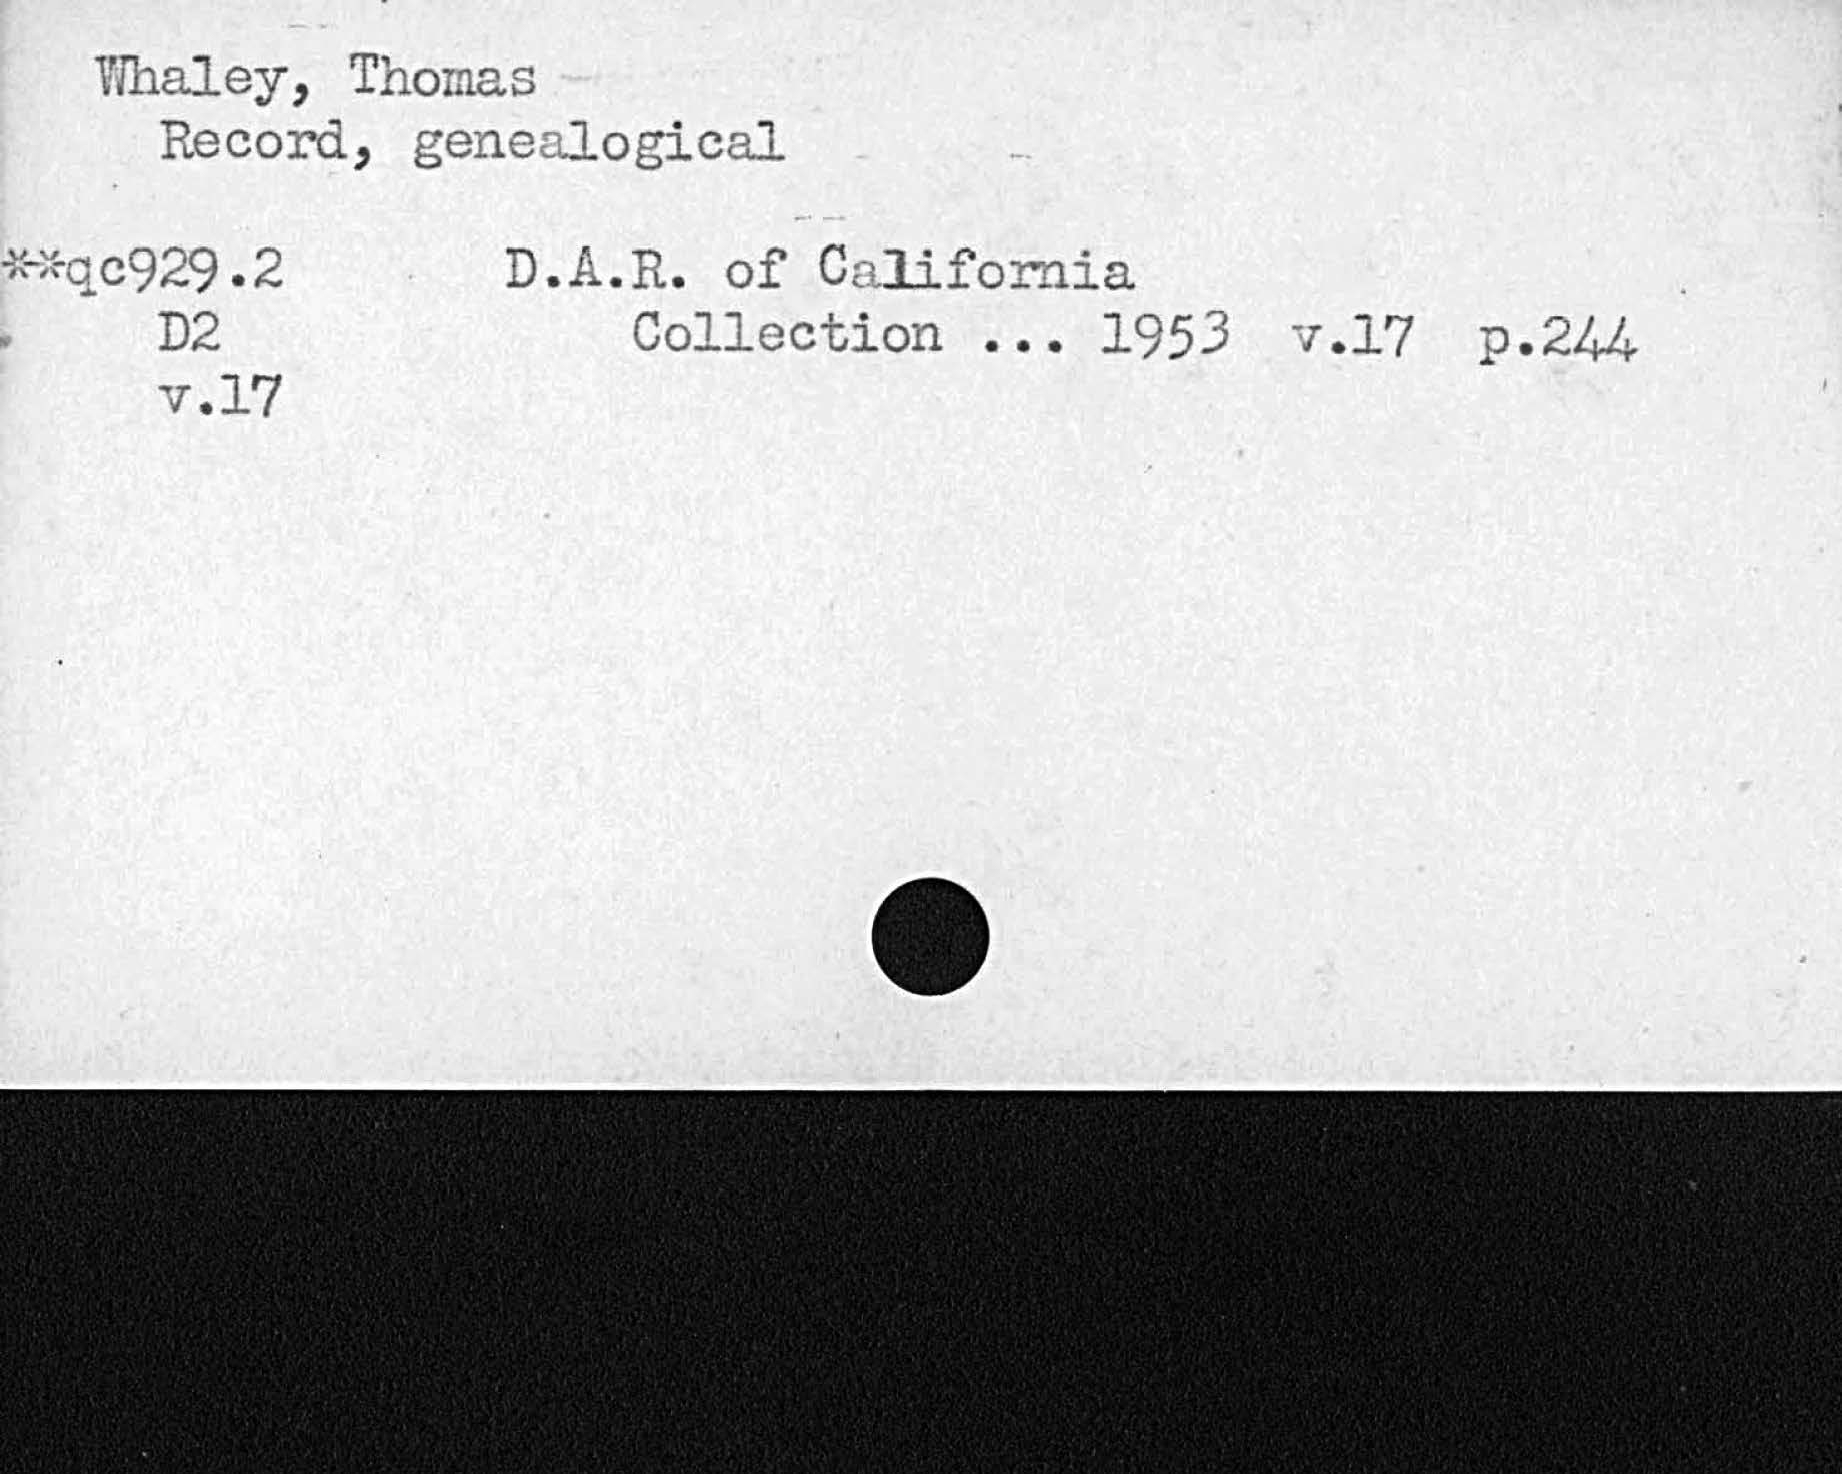 Whaley, ThomasRecord, genealogicalD. A. R. of CaliforniaCollection 1953 v. l7 p. 244v. l7   qc929. 2  D2